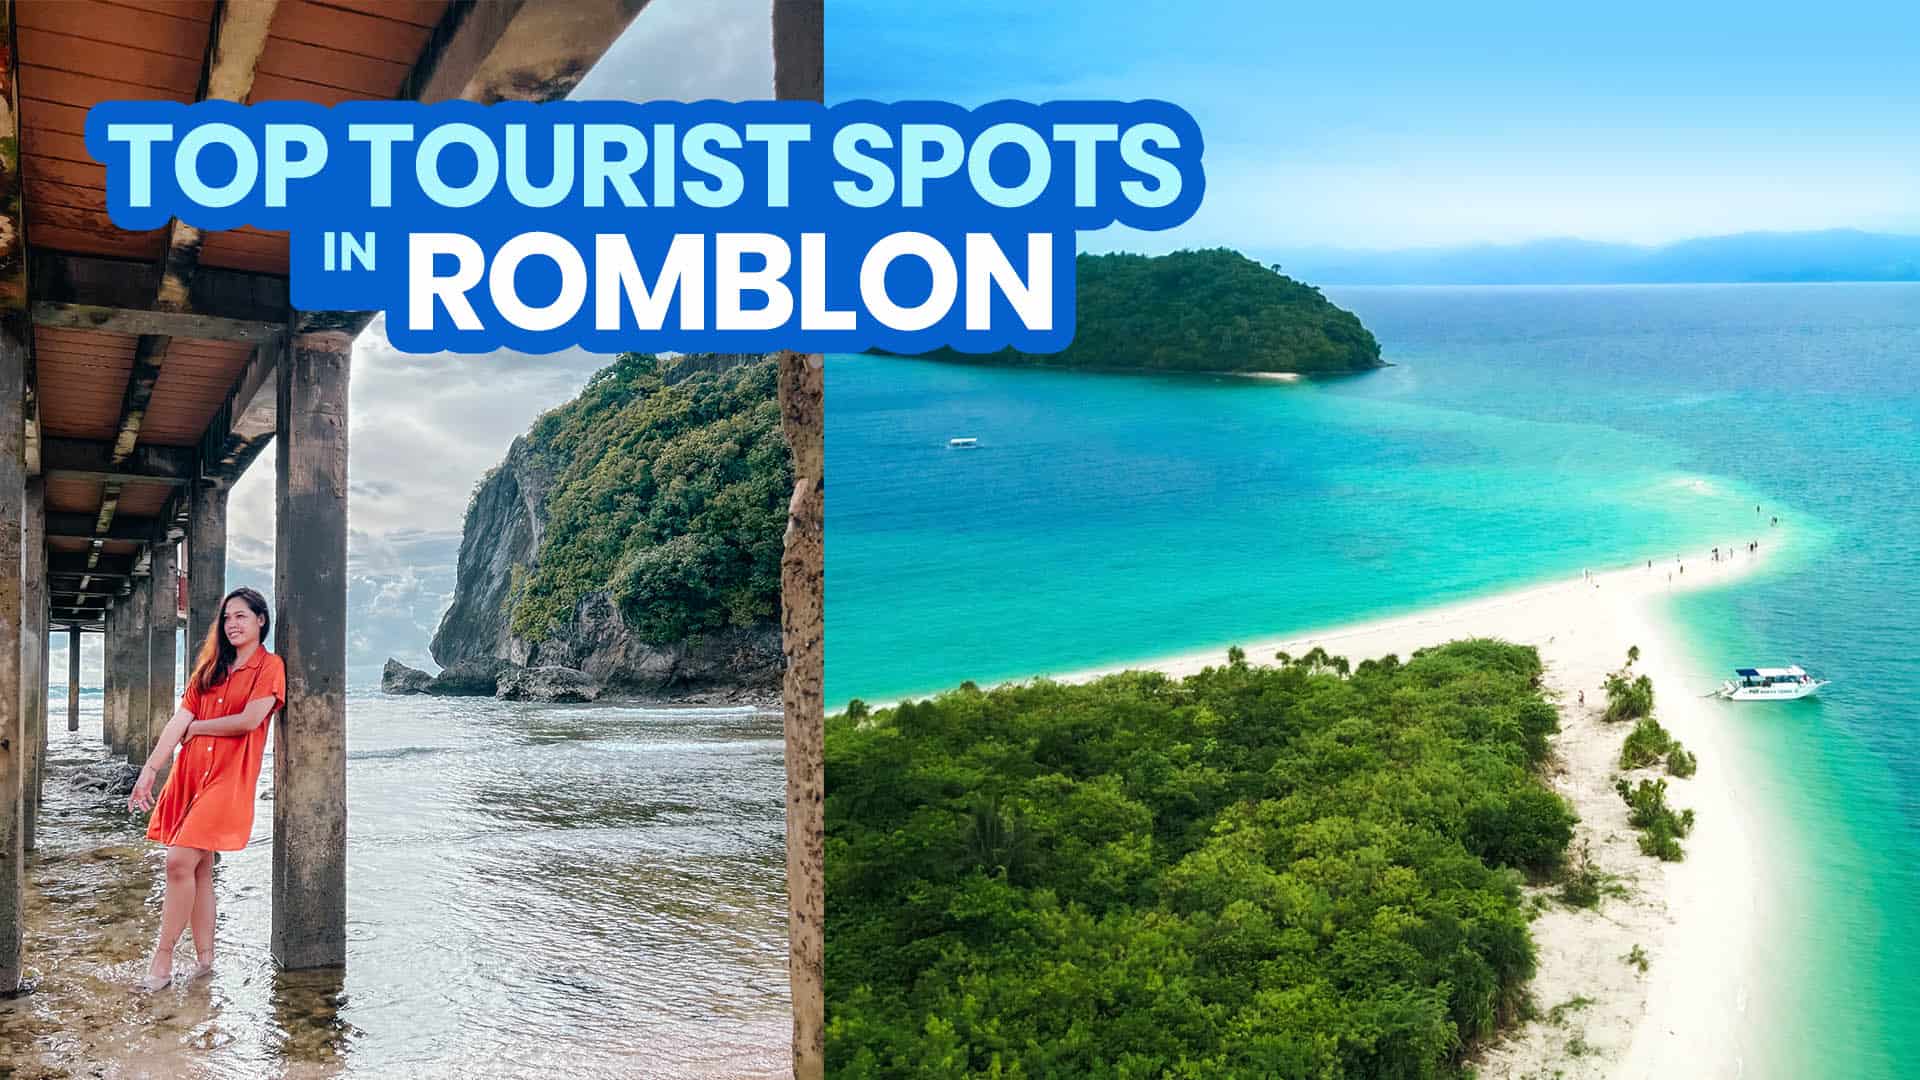 25 ROMBLON TOURIST SPOTS to Go to & Issues to Do